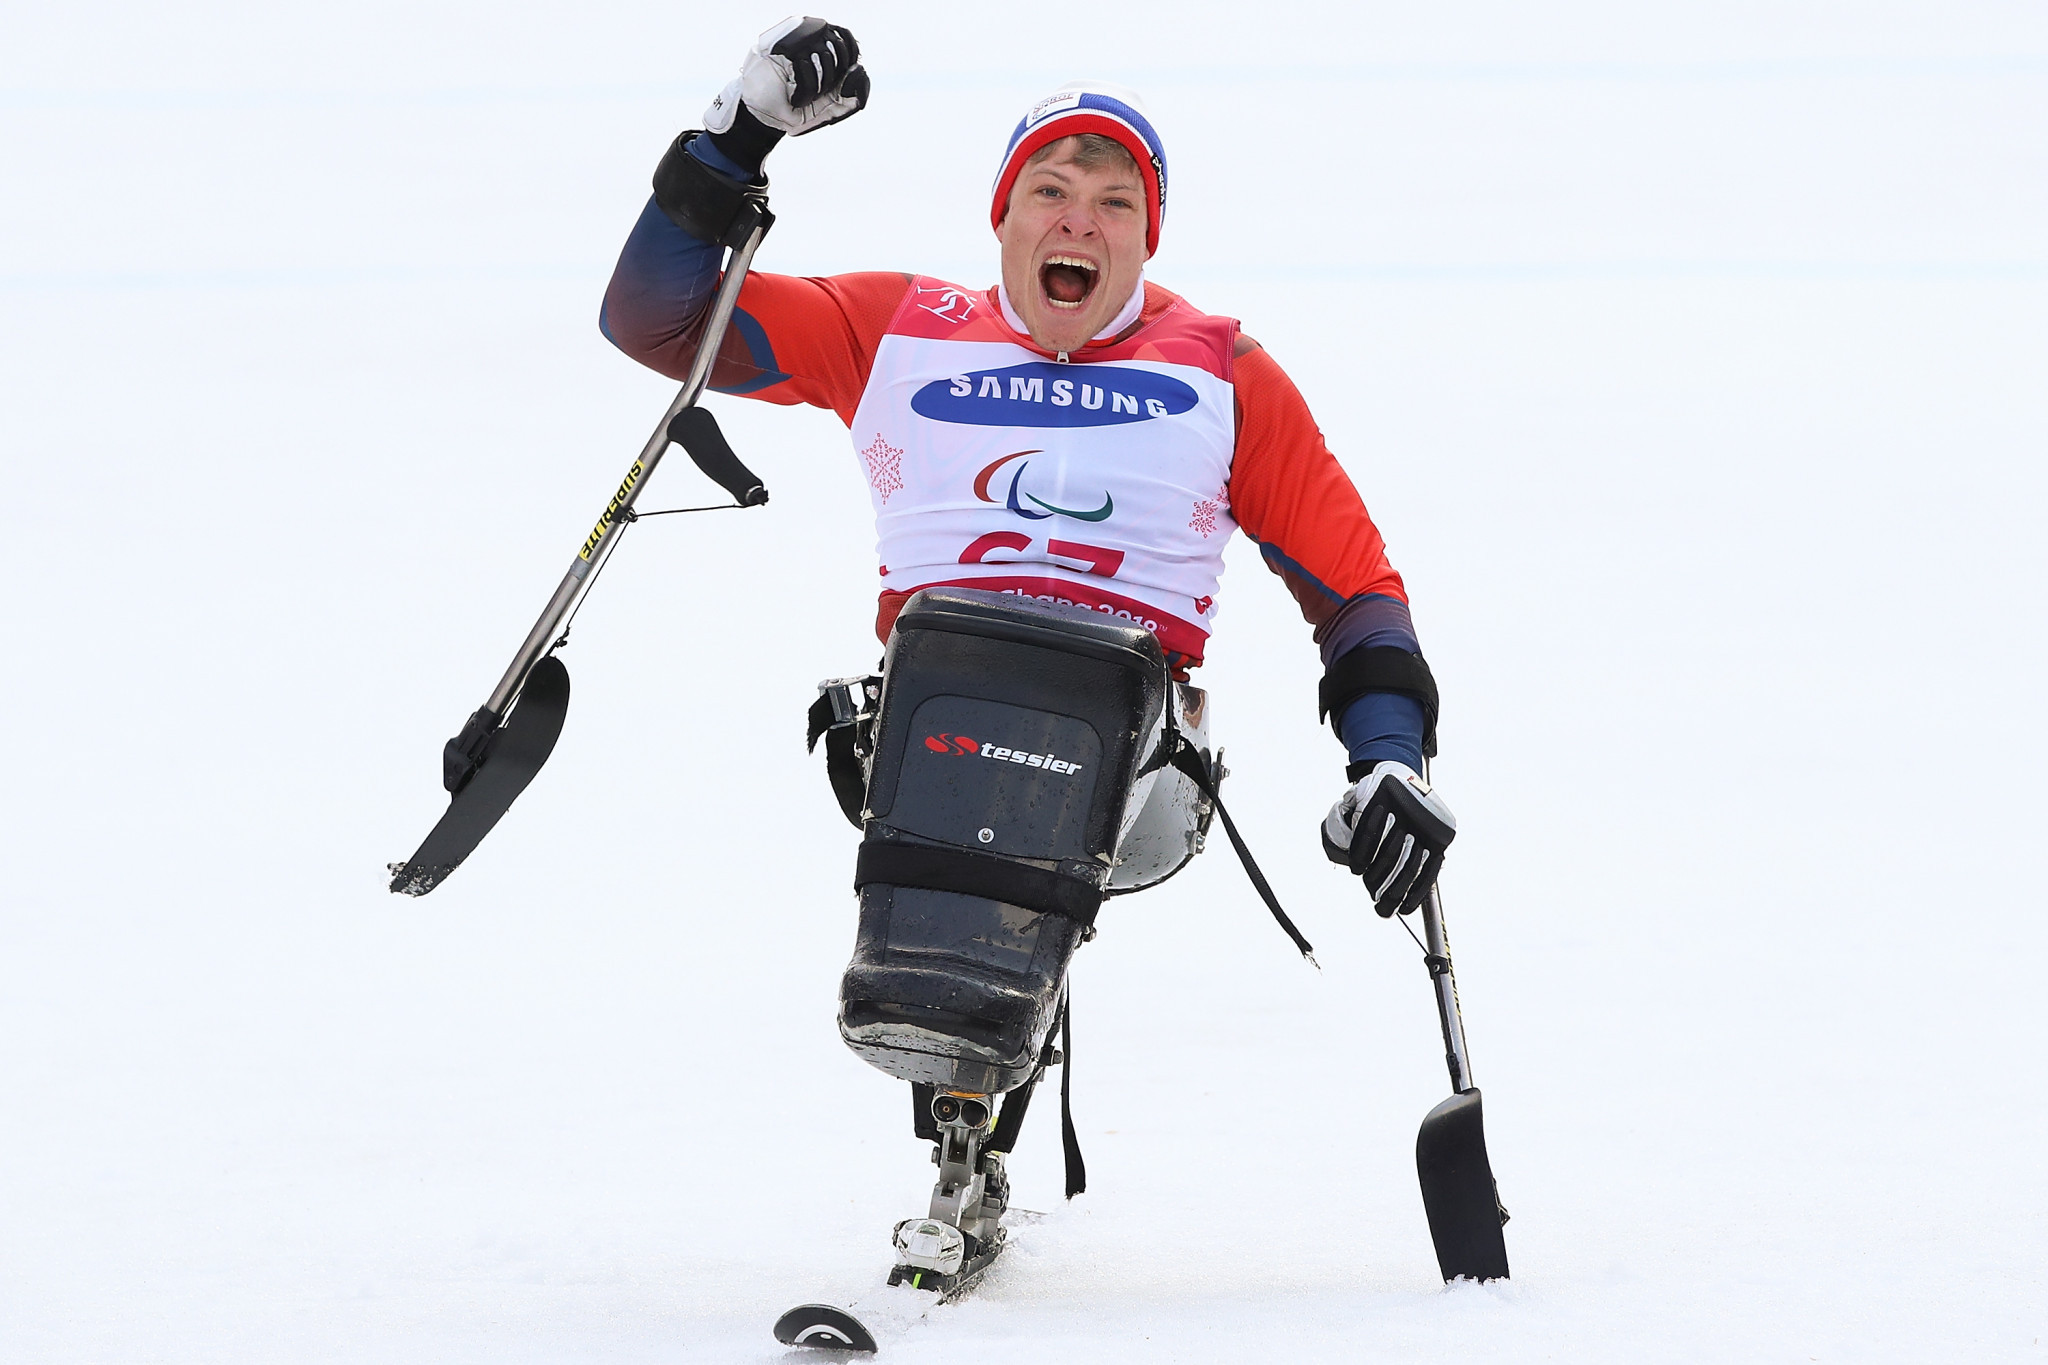 Norway's Jesper Pedersen matched the feat of three consecutive victories achieved by Italy's Giacomo Bertagnolli at the World Para Skiiing World Cup in Prato Nevoso ©Getty Images